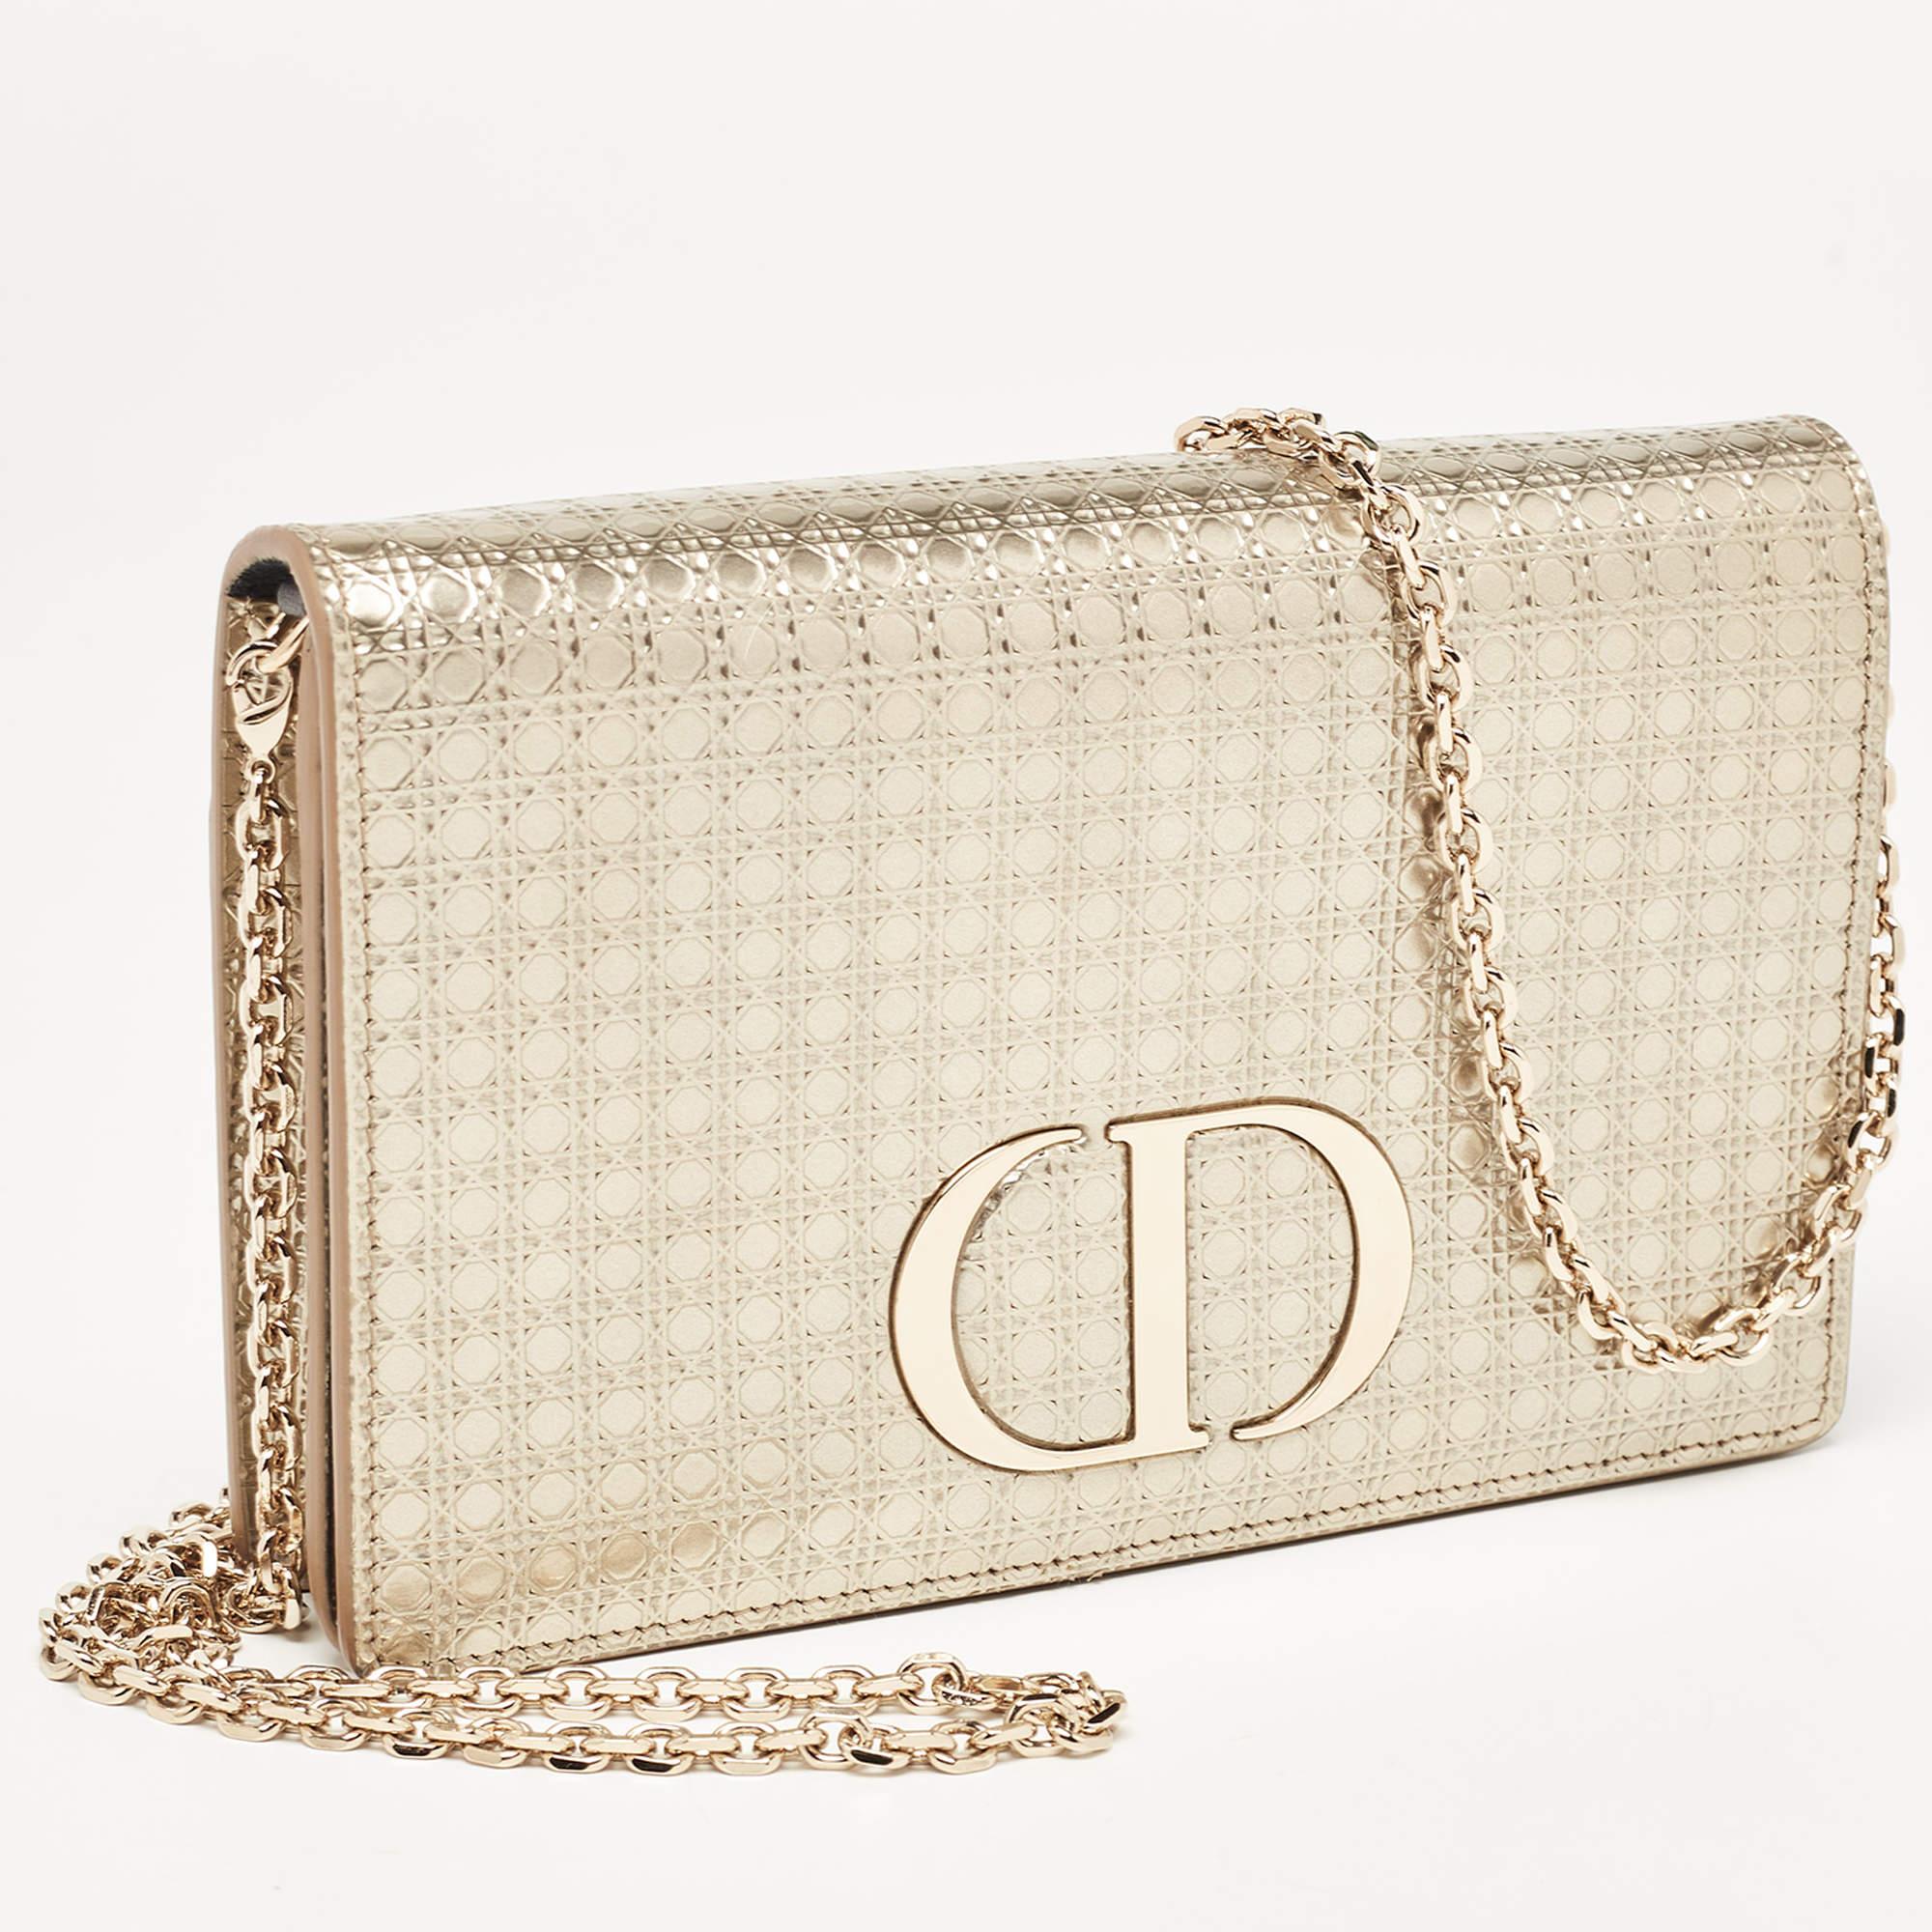 Trust this Dior 30 Montaigne pouch bag to be light, durable, and comfortable to carry. It is crafted beautifully using the best materials to be a durable style ally.

